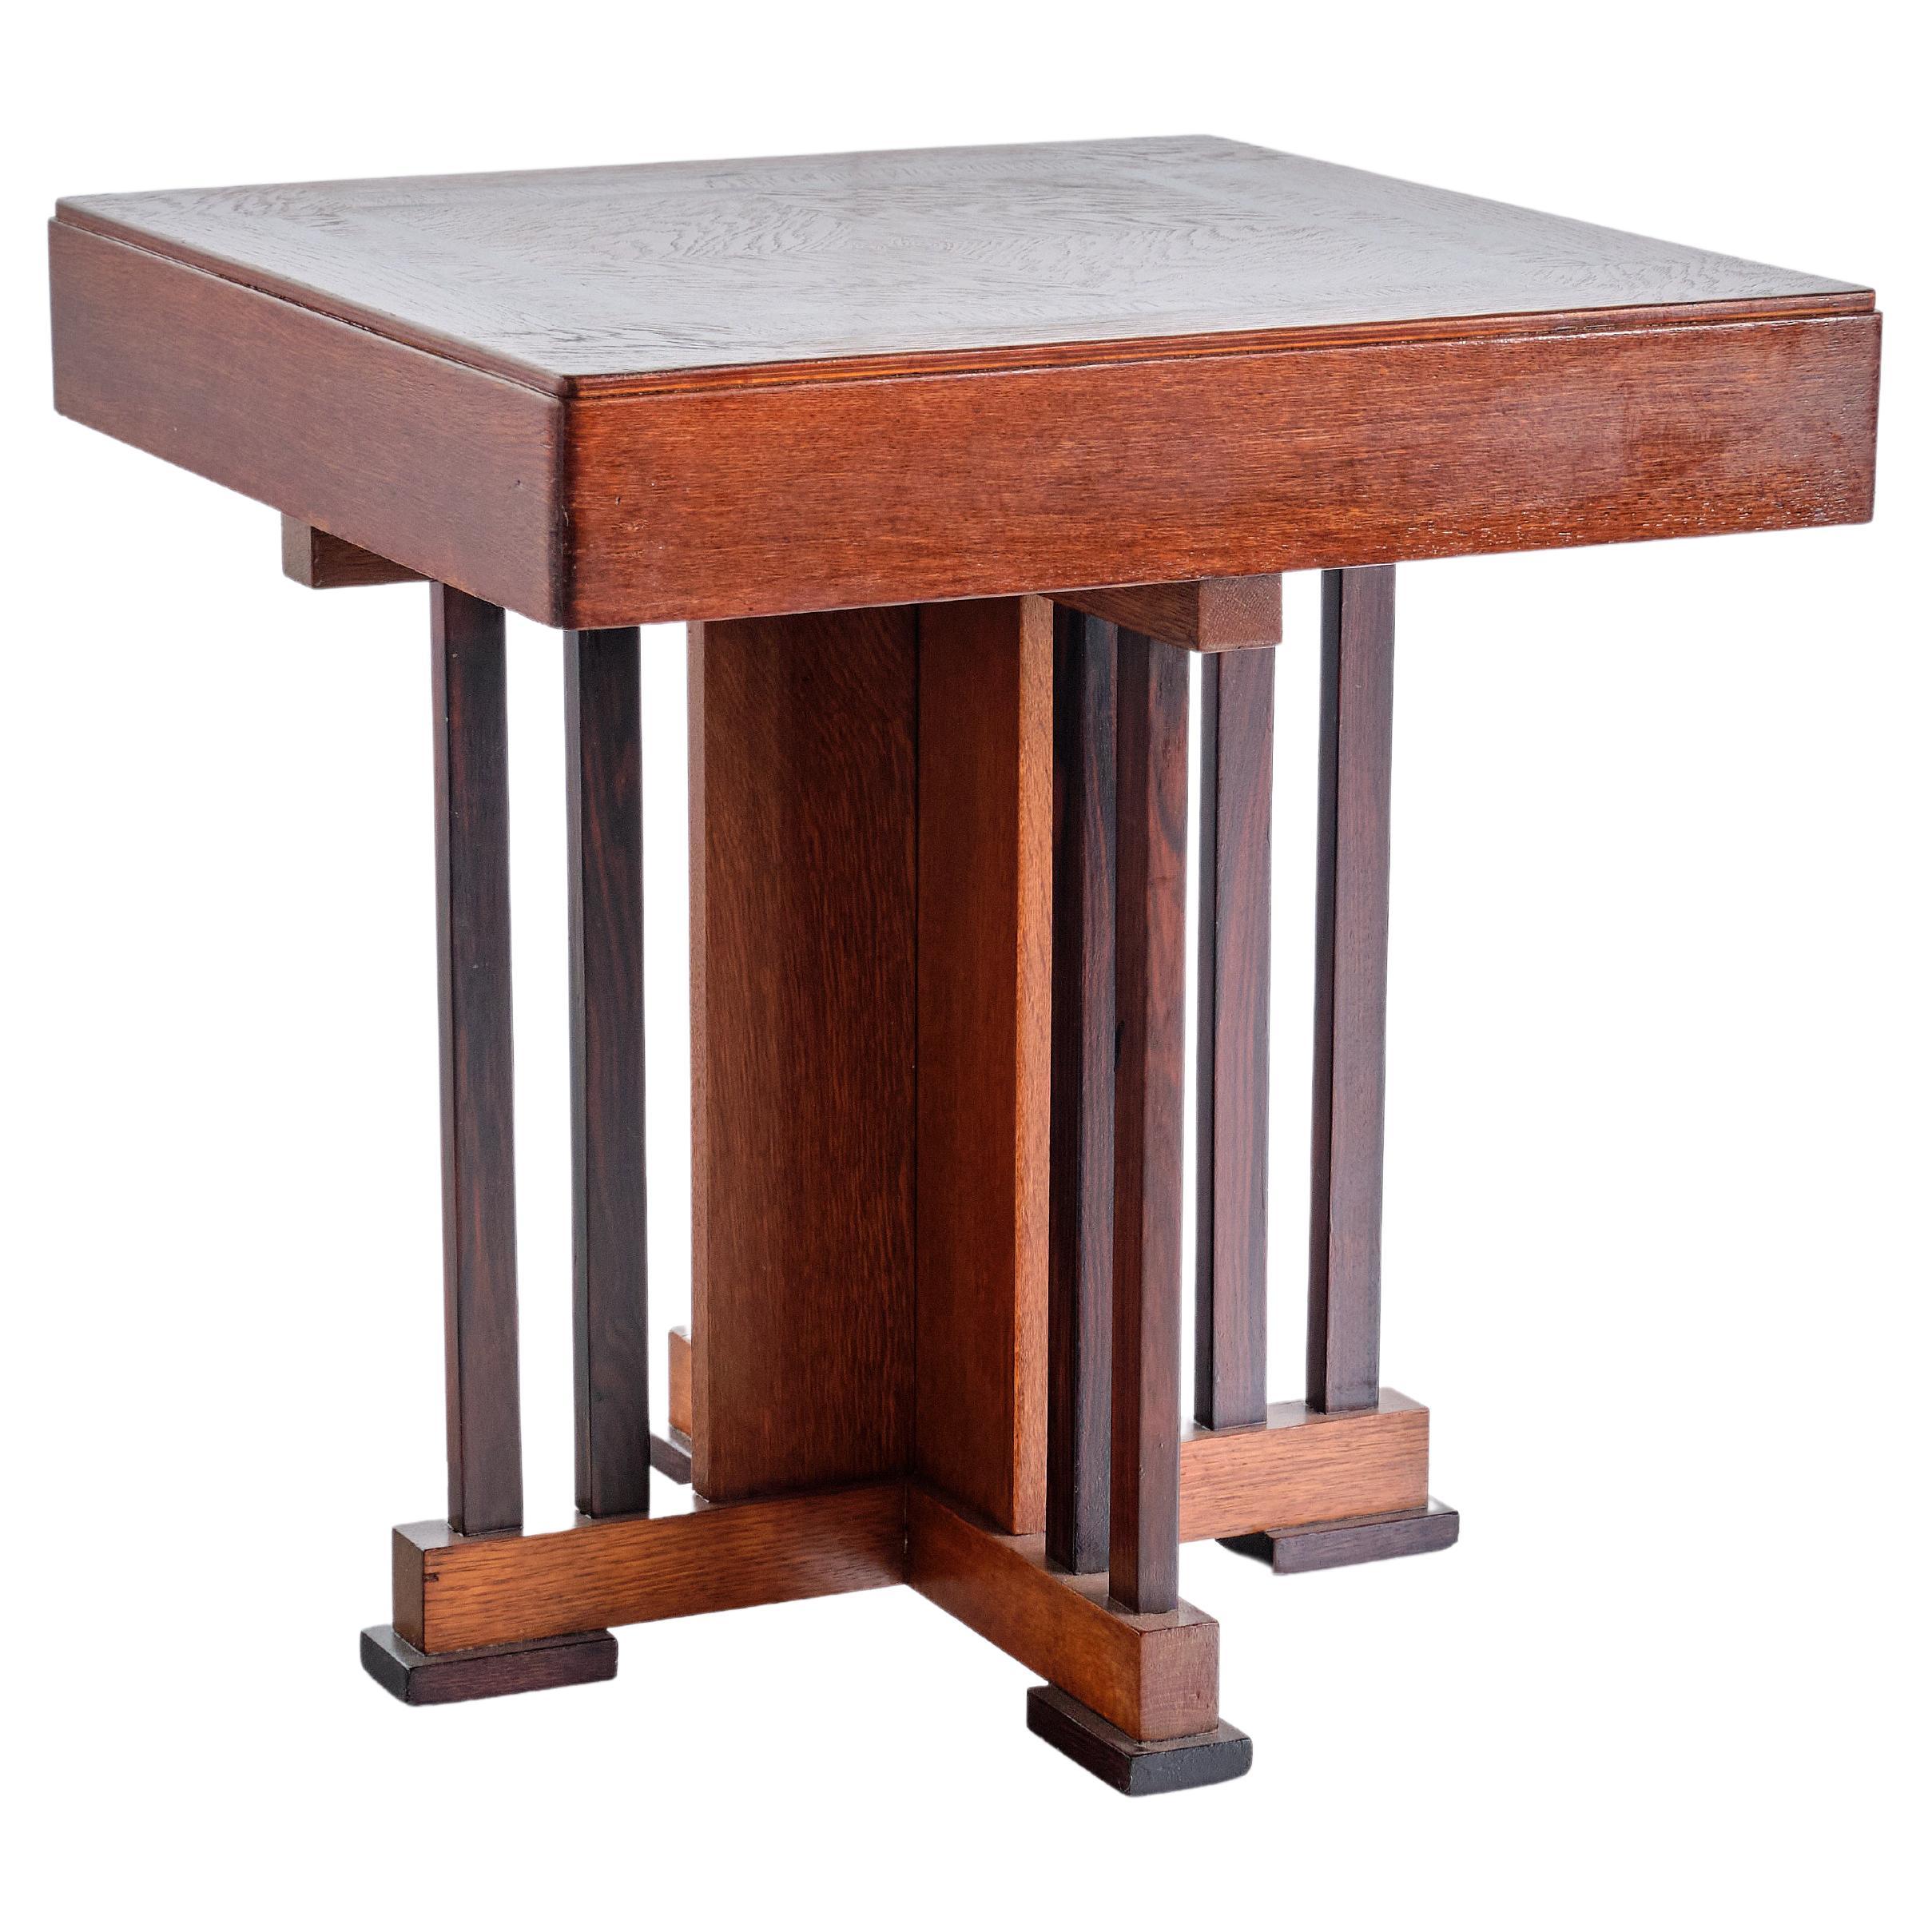 P.E.L. Izeren Side Table in Oak and Macassar Ebony, Netherlands, 1930s For Sale